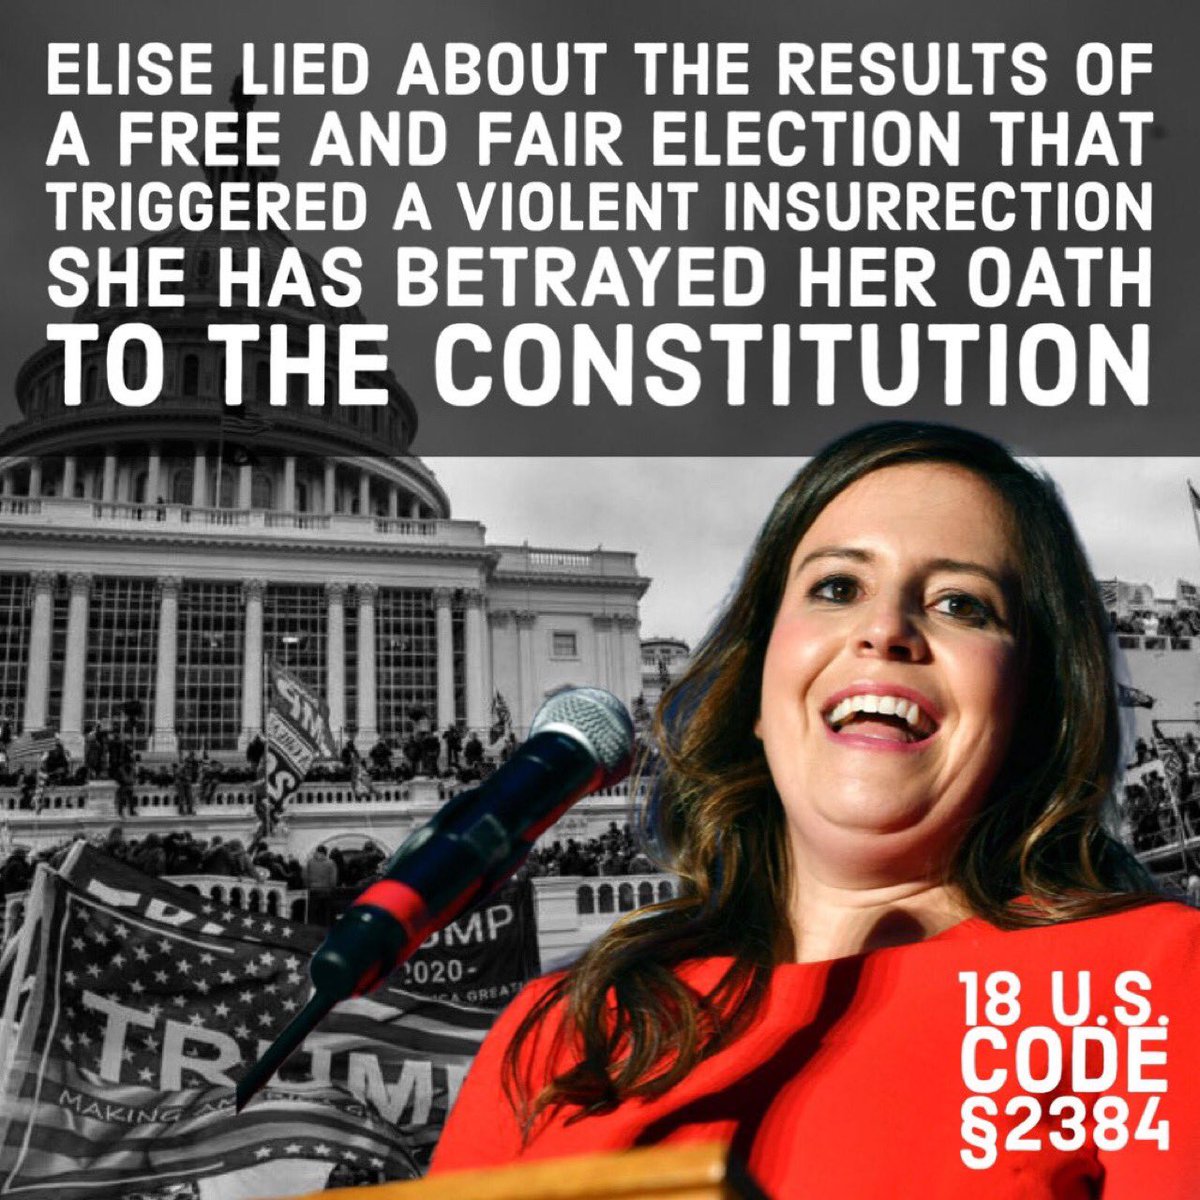 Elise is really saying: we honor police, but not the capitol police who protected democracy, the life of the VP, and my own fat ass because those poor J6 criminals are really peaceful demonstrators who are now hostages and should be freed. #NY21 vote her out